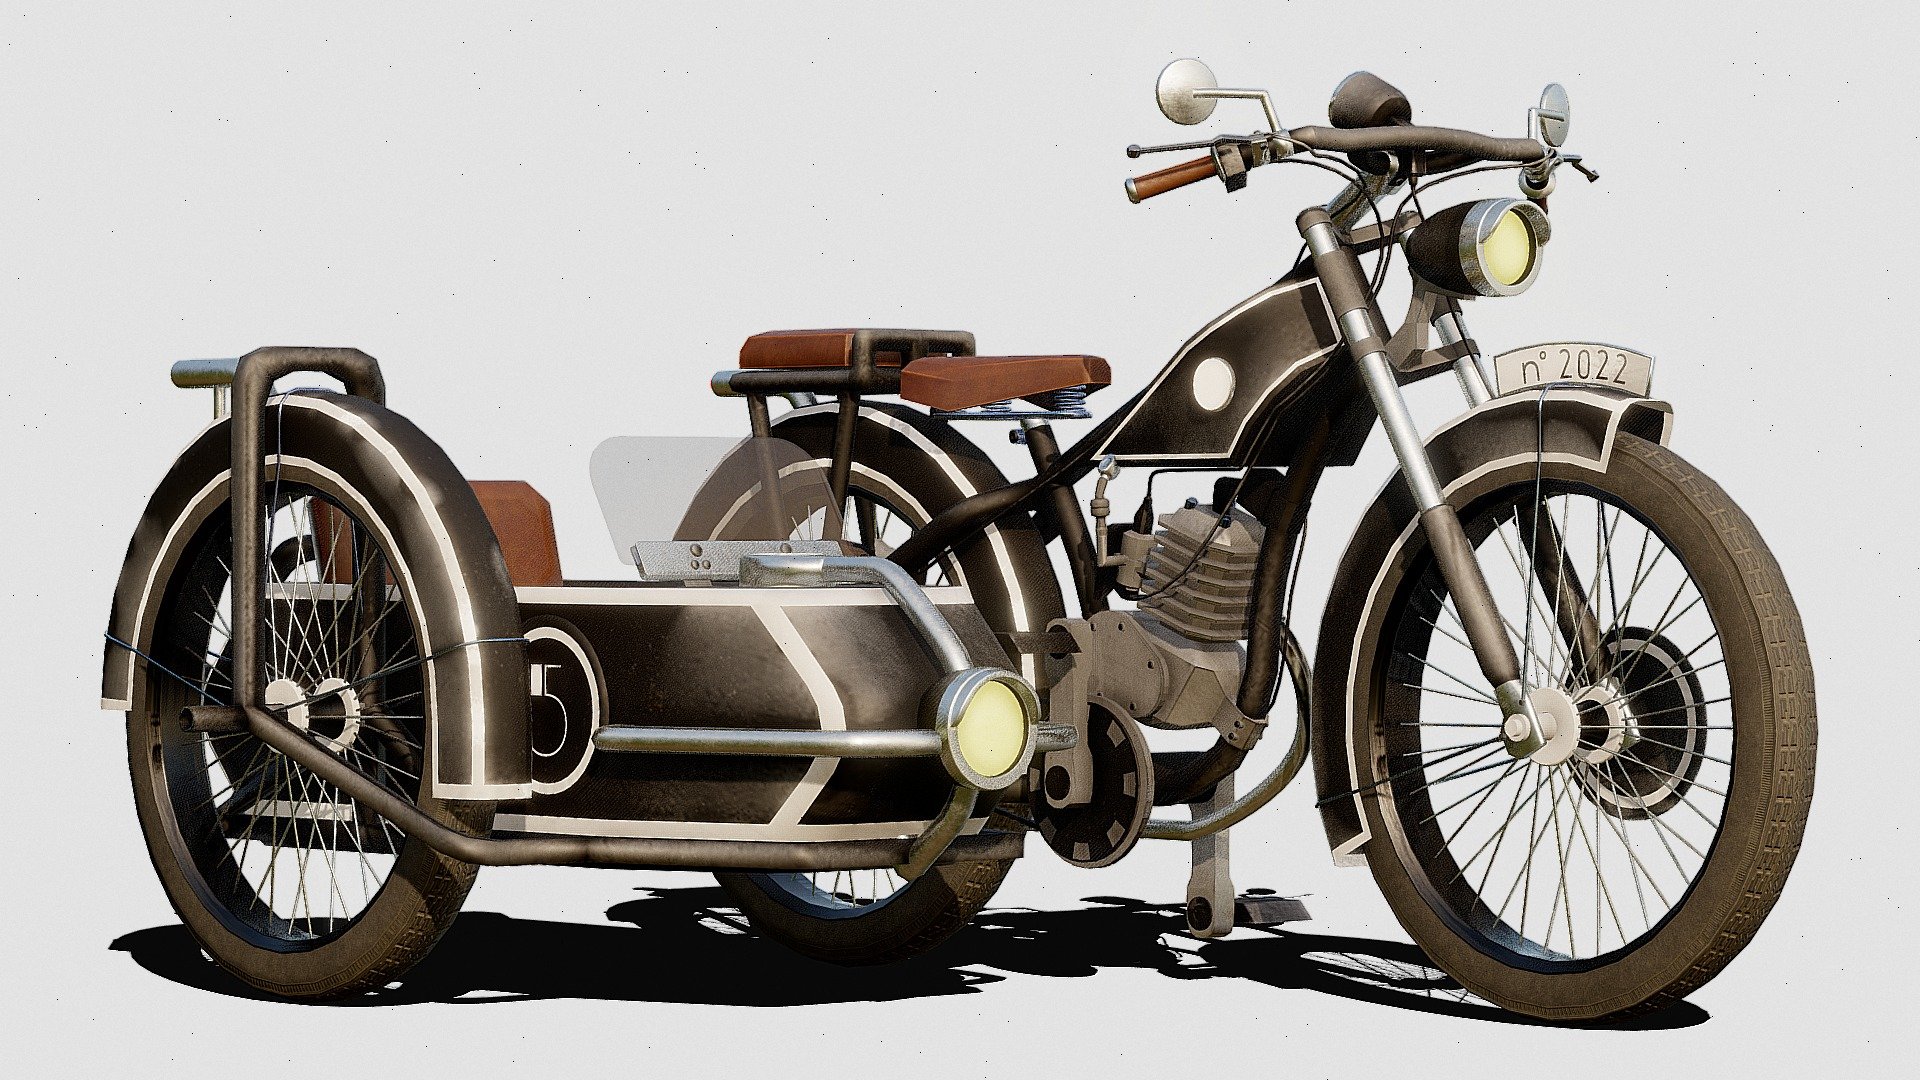 NOW WITH SIDE CAR AND TEXTURIZED

My fisrt 3D bike ever&hellip; Buld with 80cc 2Troke Engine

Base on Pre-War bike!

Bike and SideCar are separable! - Morellete - Retro Bike 80cc - SideCar - Buy Royalty Free 3D model by Scuderia Morello (@scudmorello) 3d model